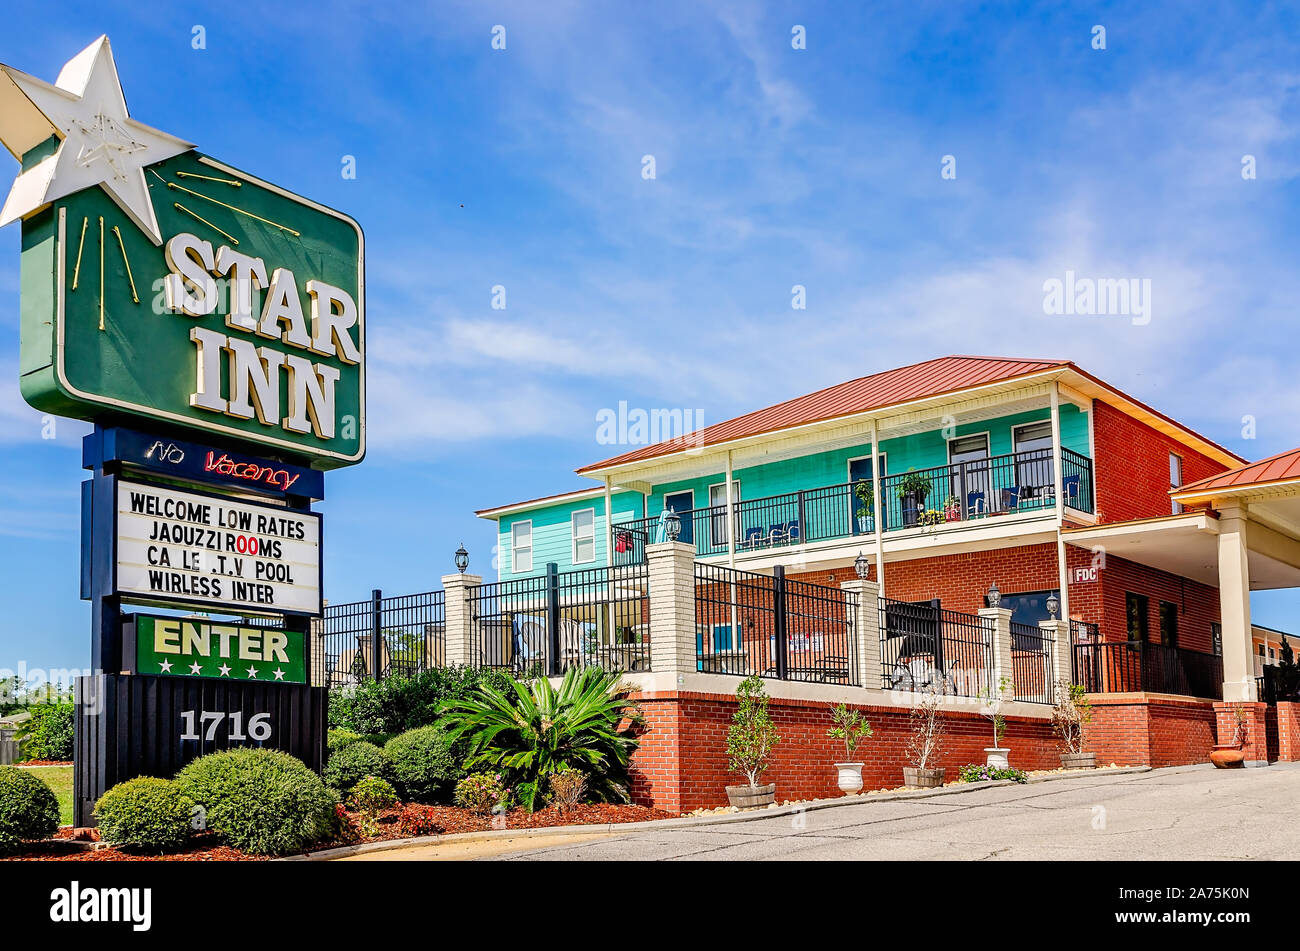 A sign for the Star Inn motel is pictured with the motel in the background, Oct. 22, 2019, in Biloxi, Mississippi. Stock Photo